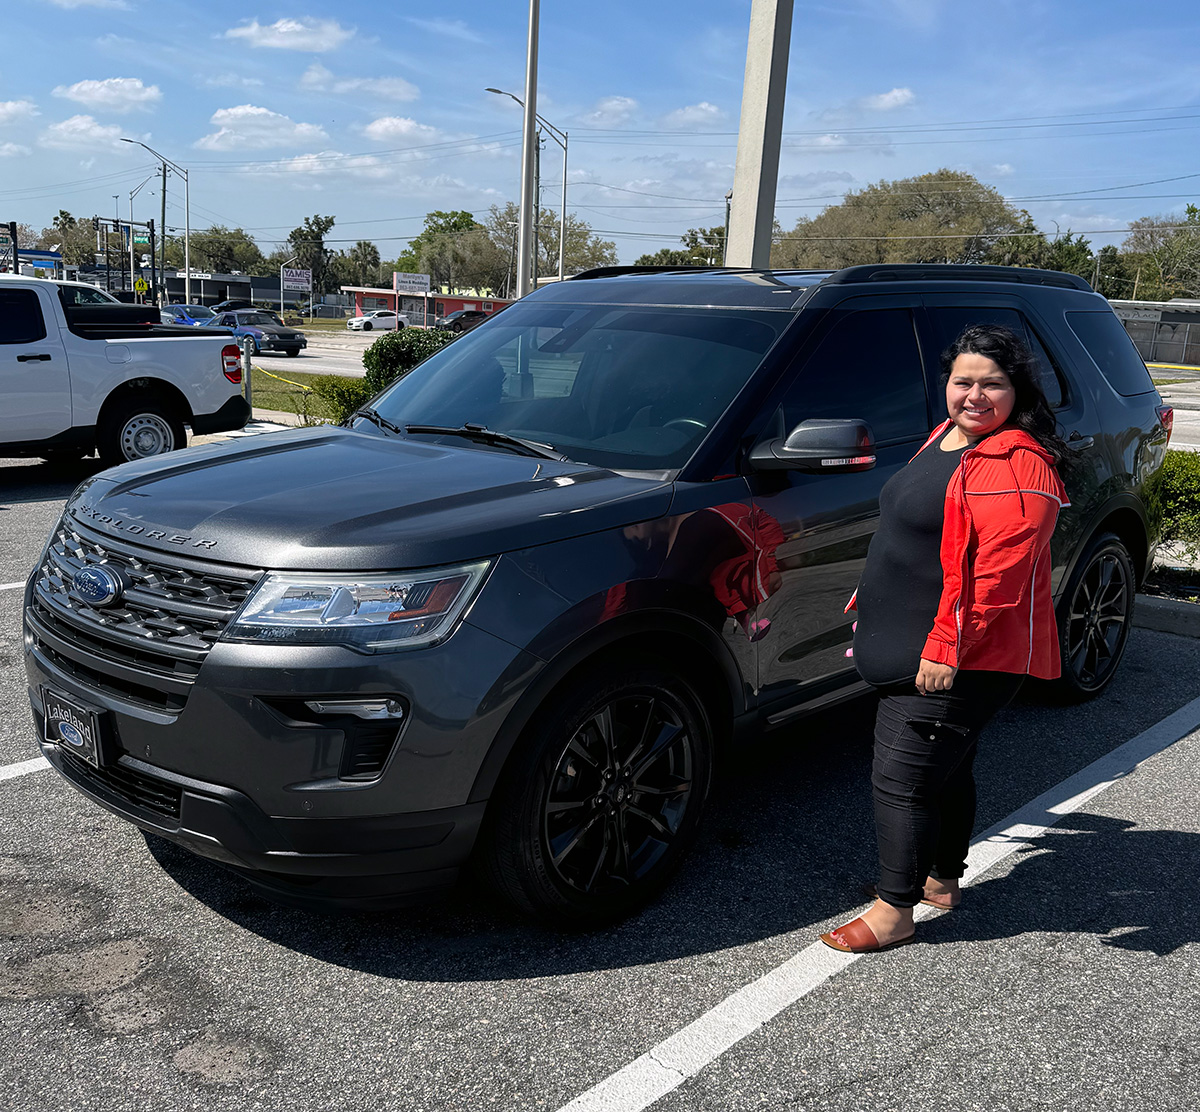 What are you looking for? Amanda Rangel found her #NewSUV, the #FordExplorer at #LakelandAutomall with salesperson #RichardBerndt after making sure it was just what she was searching for... #VeryNice & Congratulations - #ThankYou for choosing us, we're here for you! #FordFamily